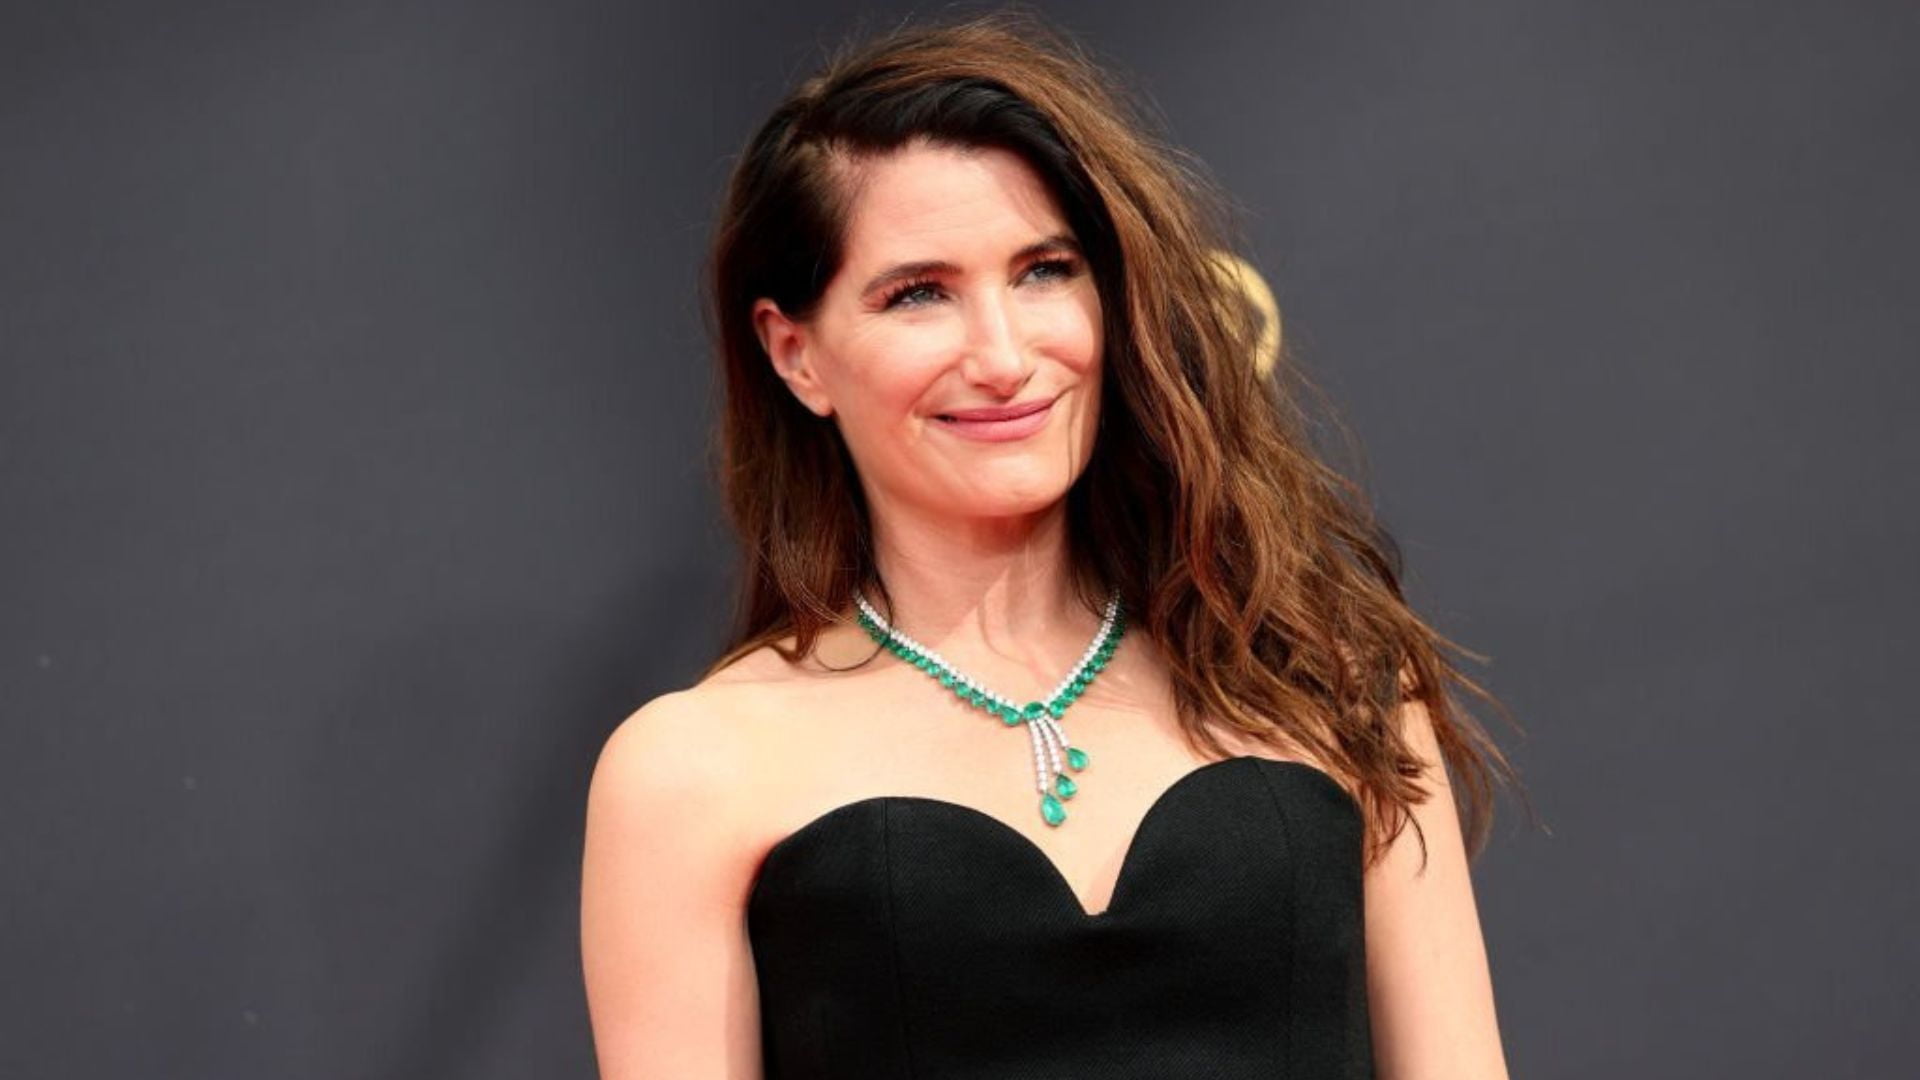 Kathryn Hahn Weight Loss [REVEALED]